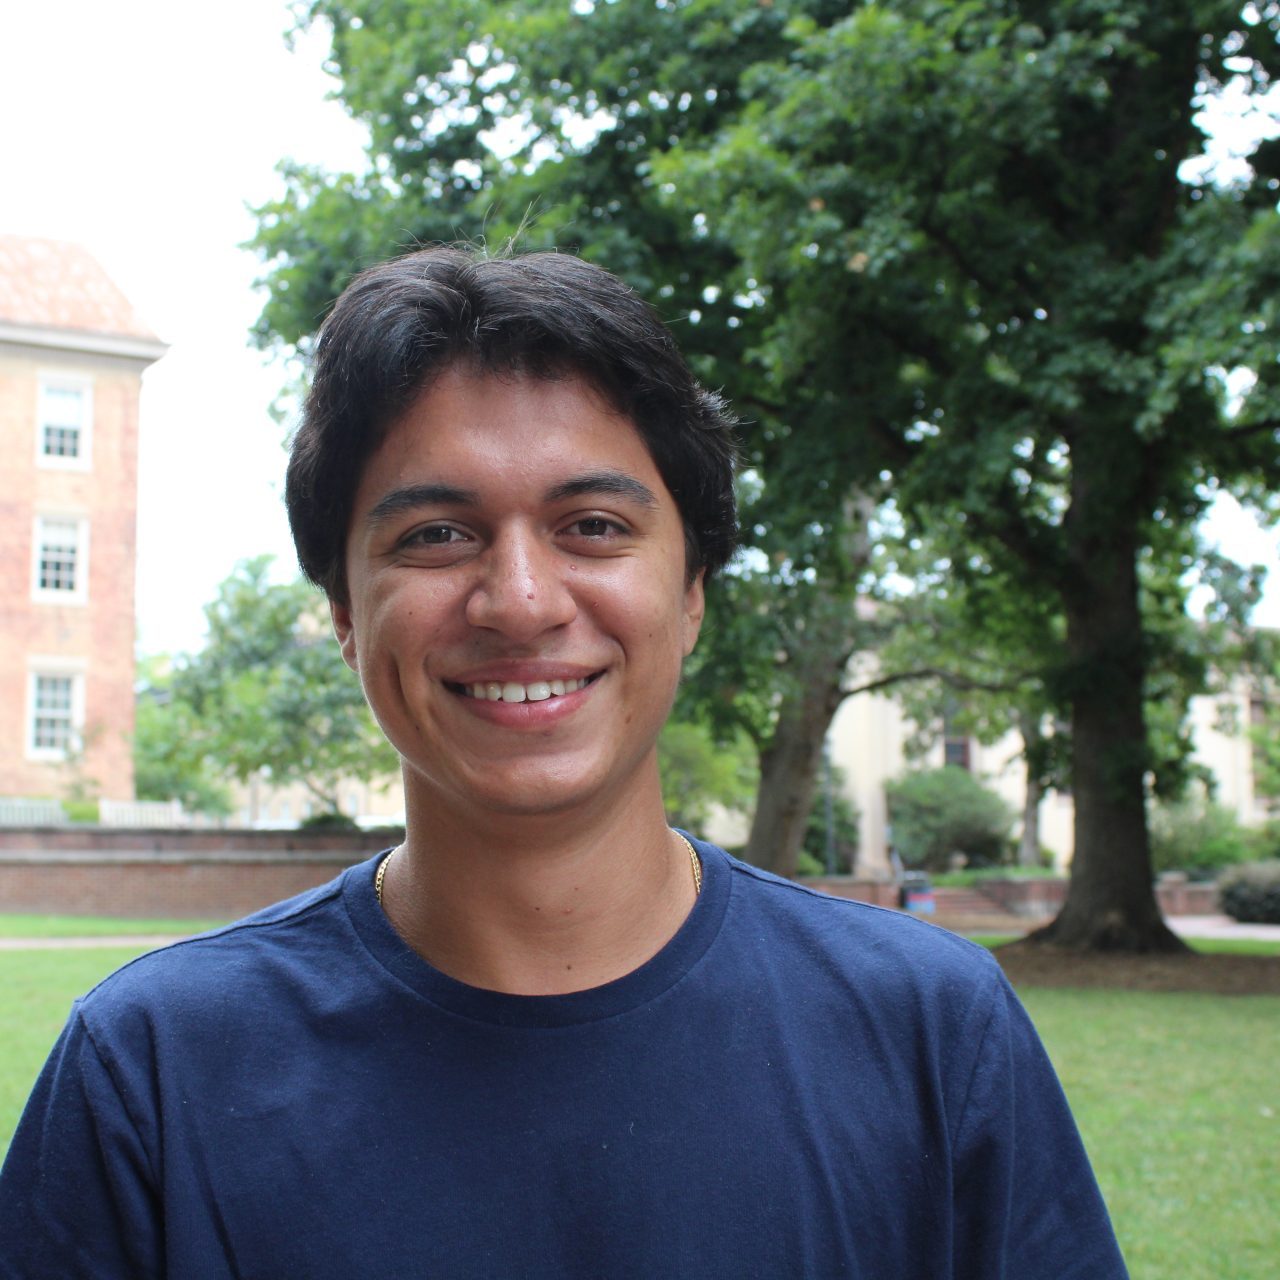 Agustin Orozco smiling with a UNC quad in the background